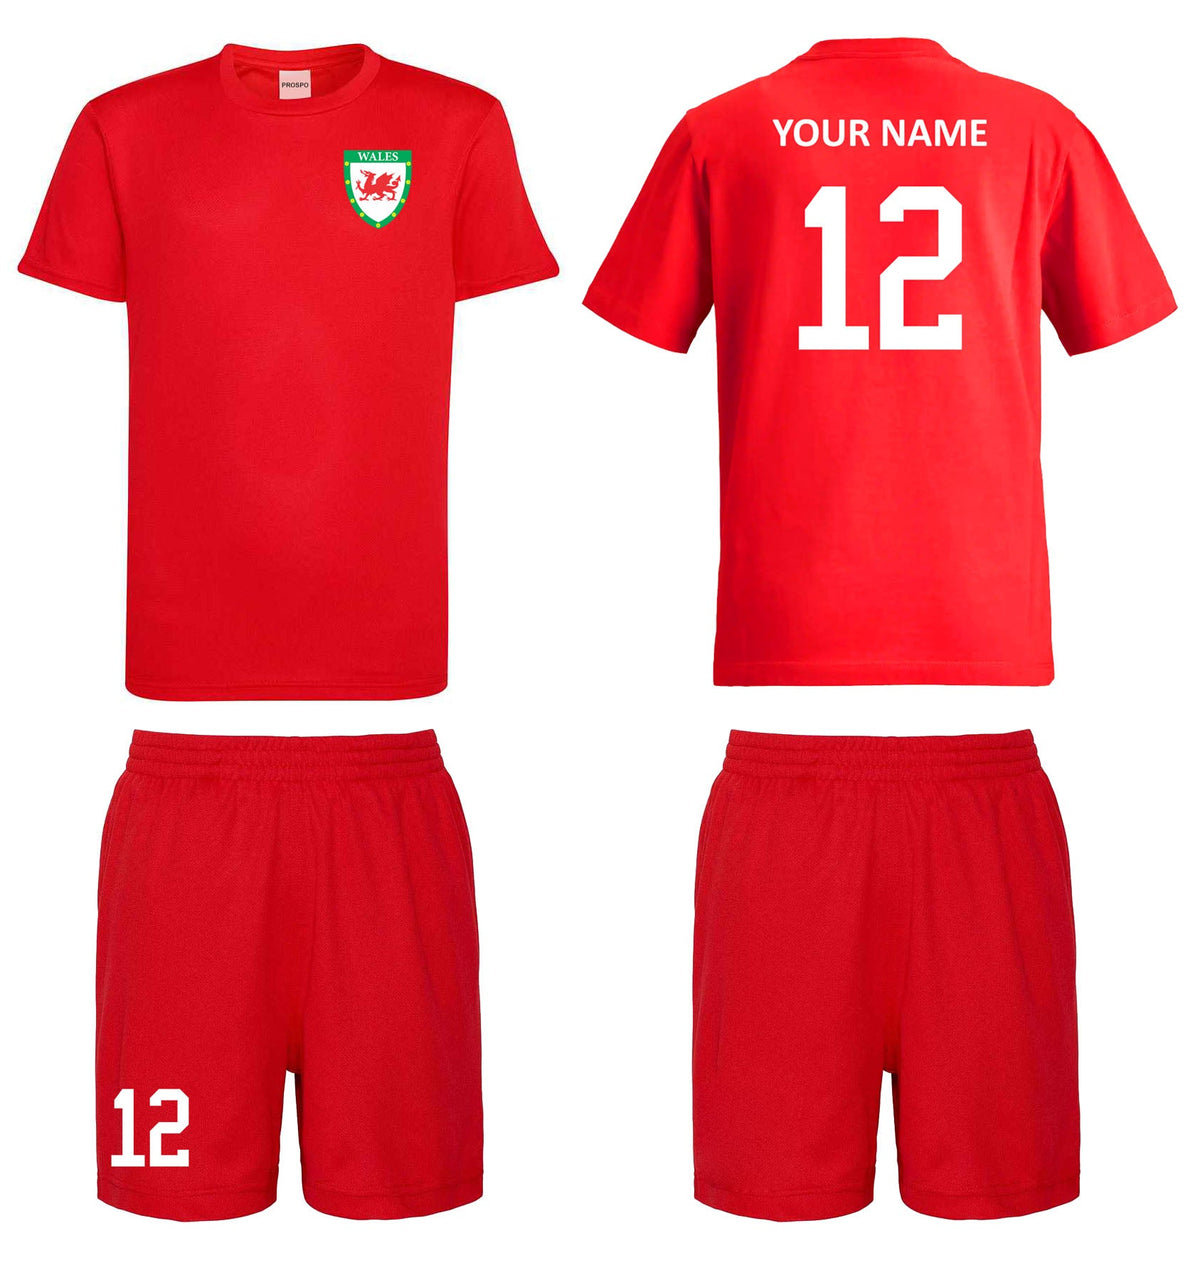 Personalised Wales Style Football Kits Customised Red Shirts and Shorts